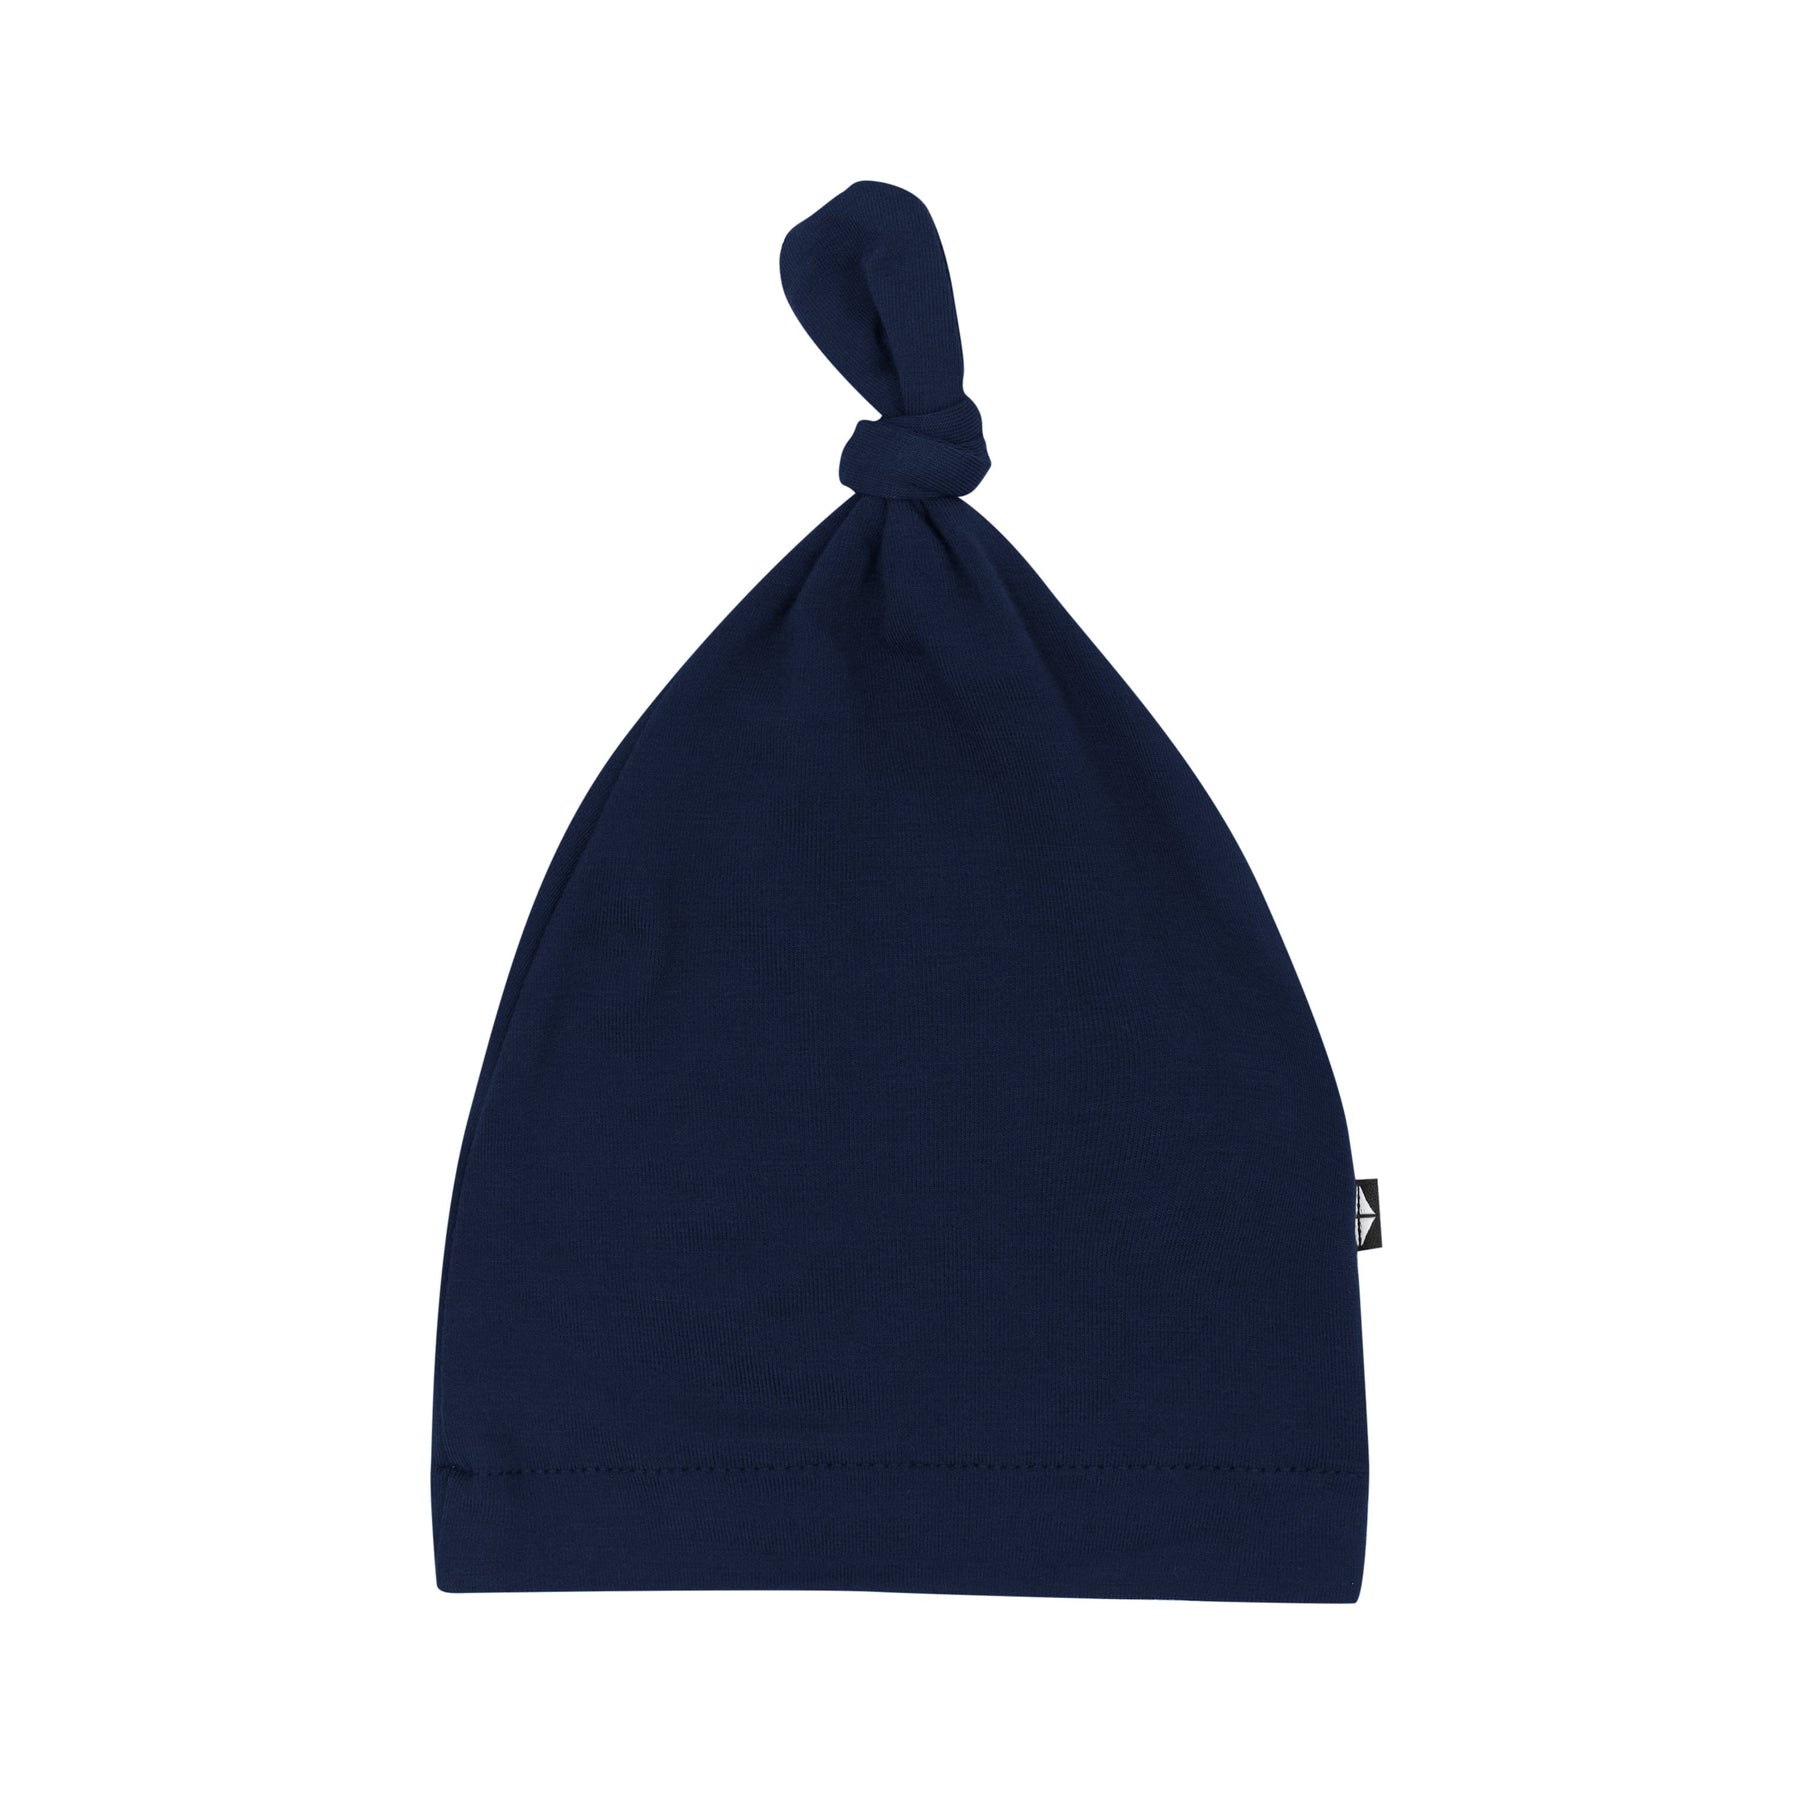 Kyte Baby Knotted Caps Knotted Cap in Navy